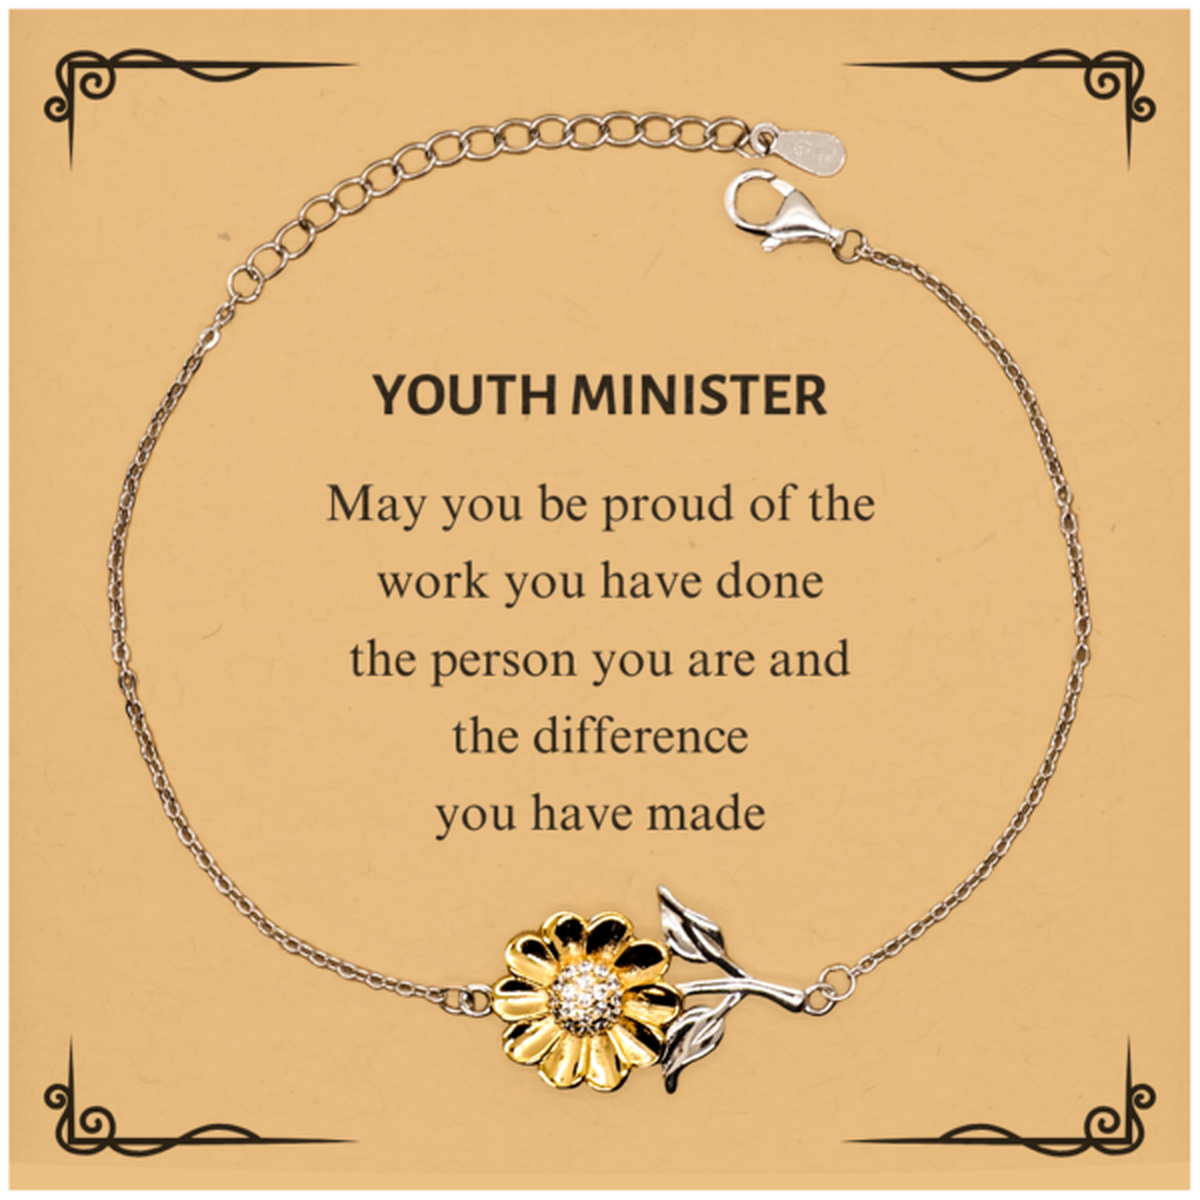 Youth Minister May you be proud of the work you have done, Retirement Youth Minister Sunflower Bracelet for Colleague Appreciation Gifts Amazing for Youth Minister